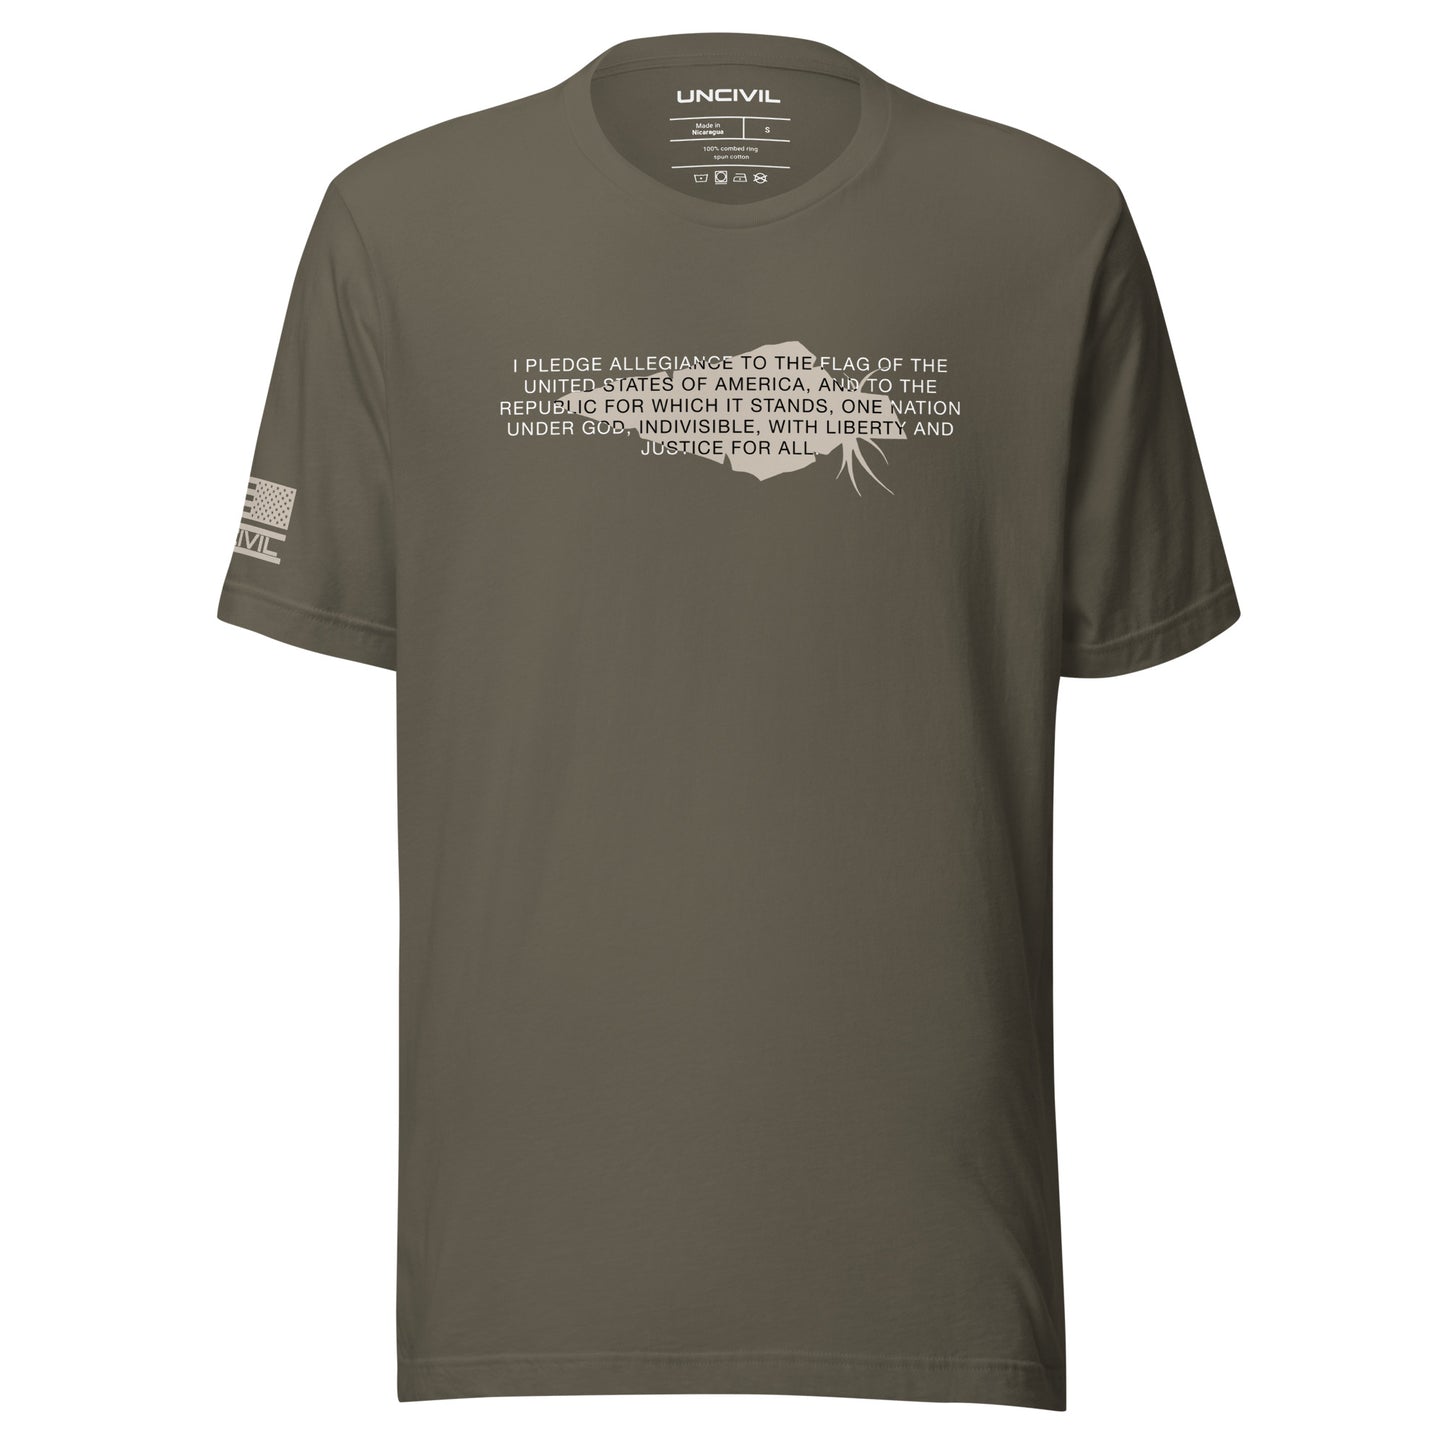 Army Green The Pledge of Allegiance UNCIVIL Tee